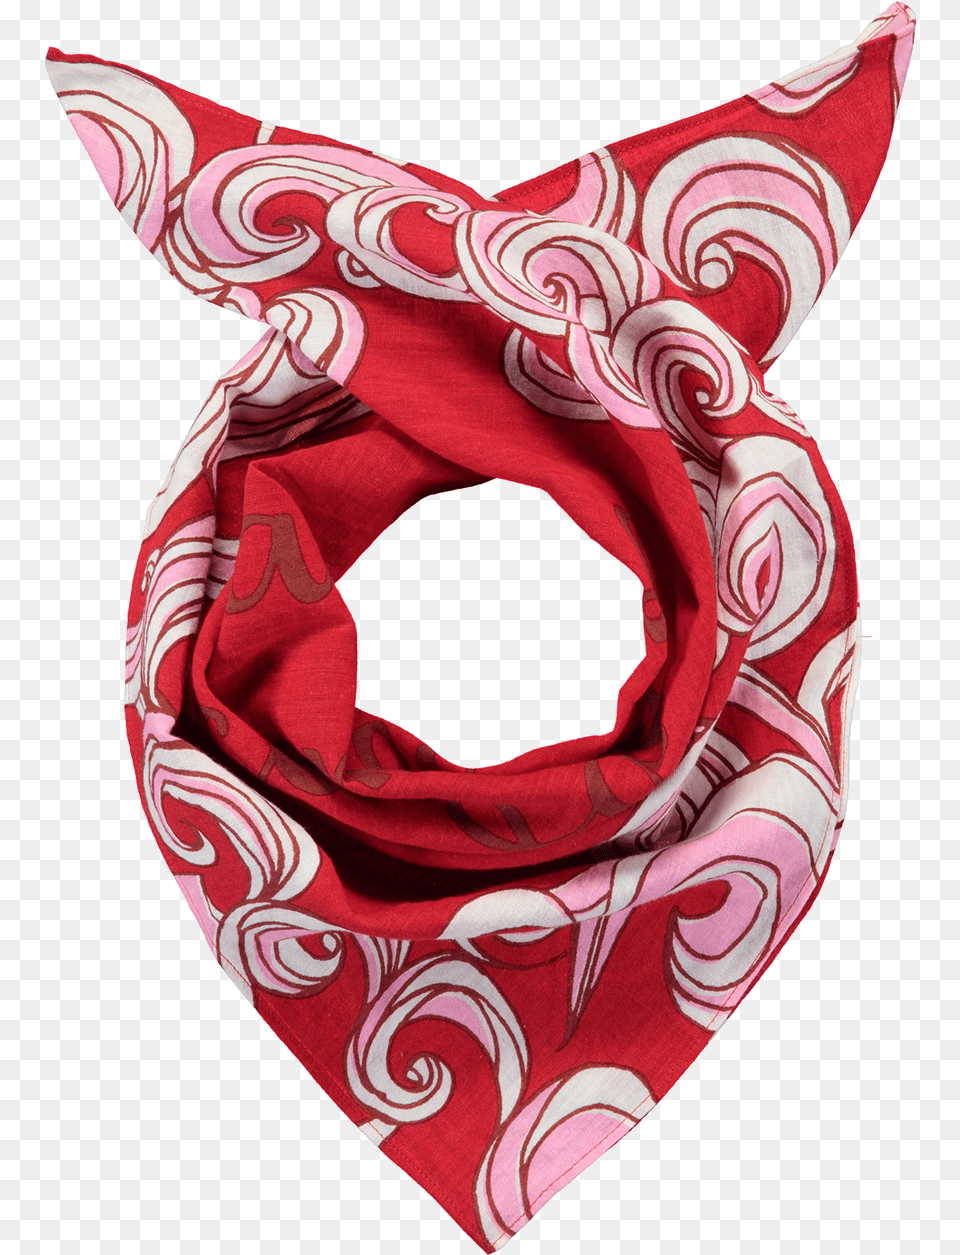 Bandana Scarf Scarf Scarf, Accessories, Clothing, Headband Png Image